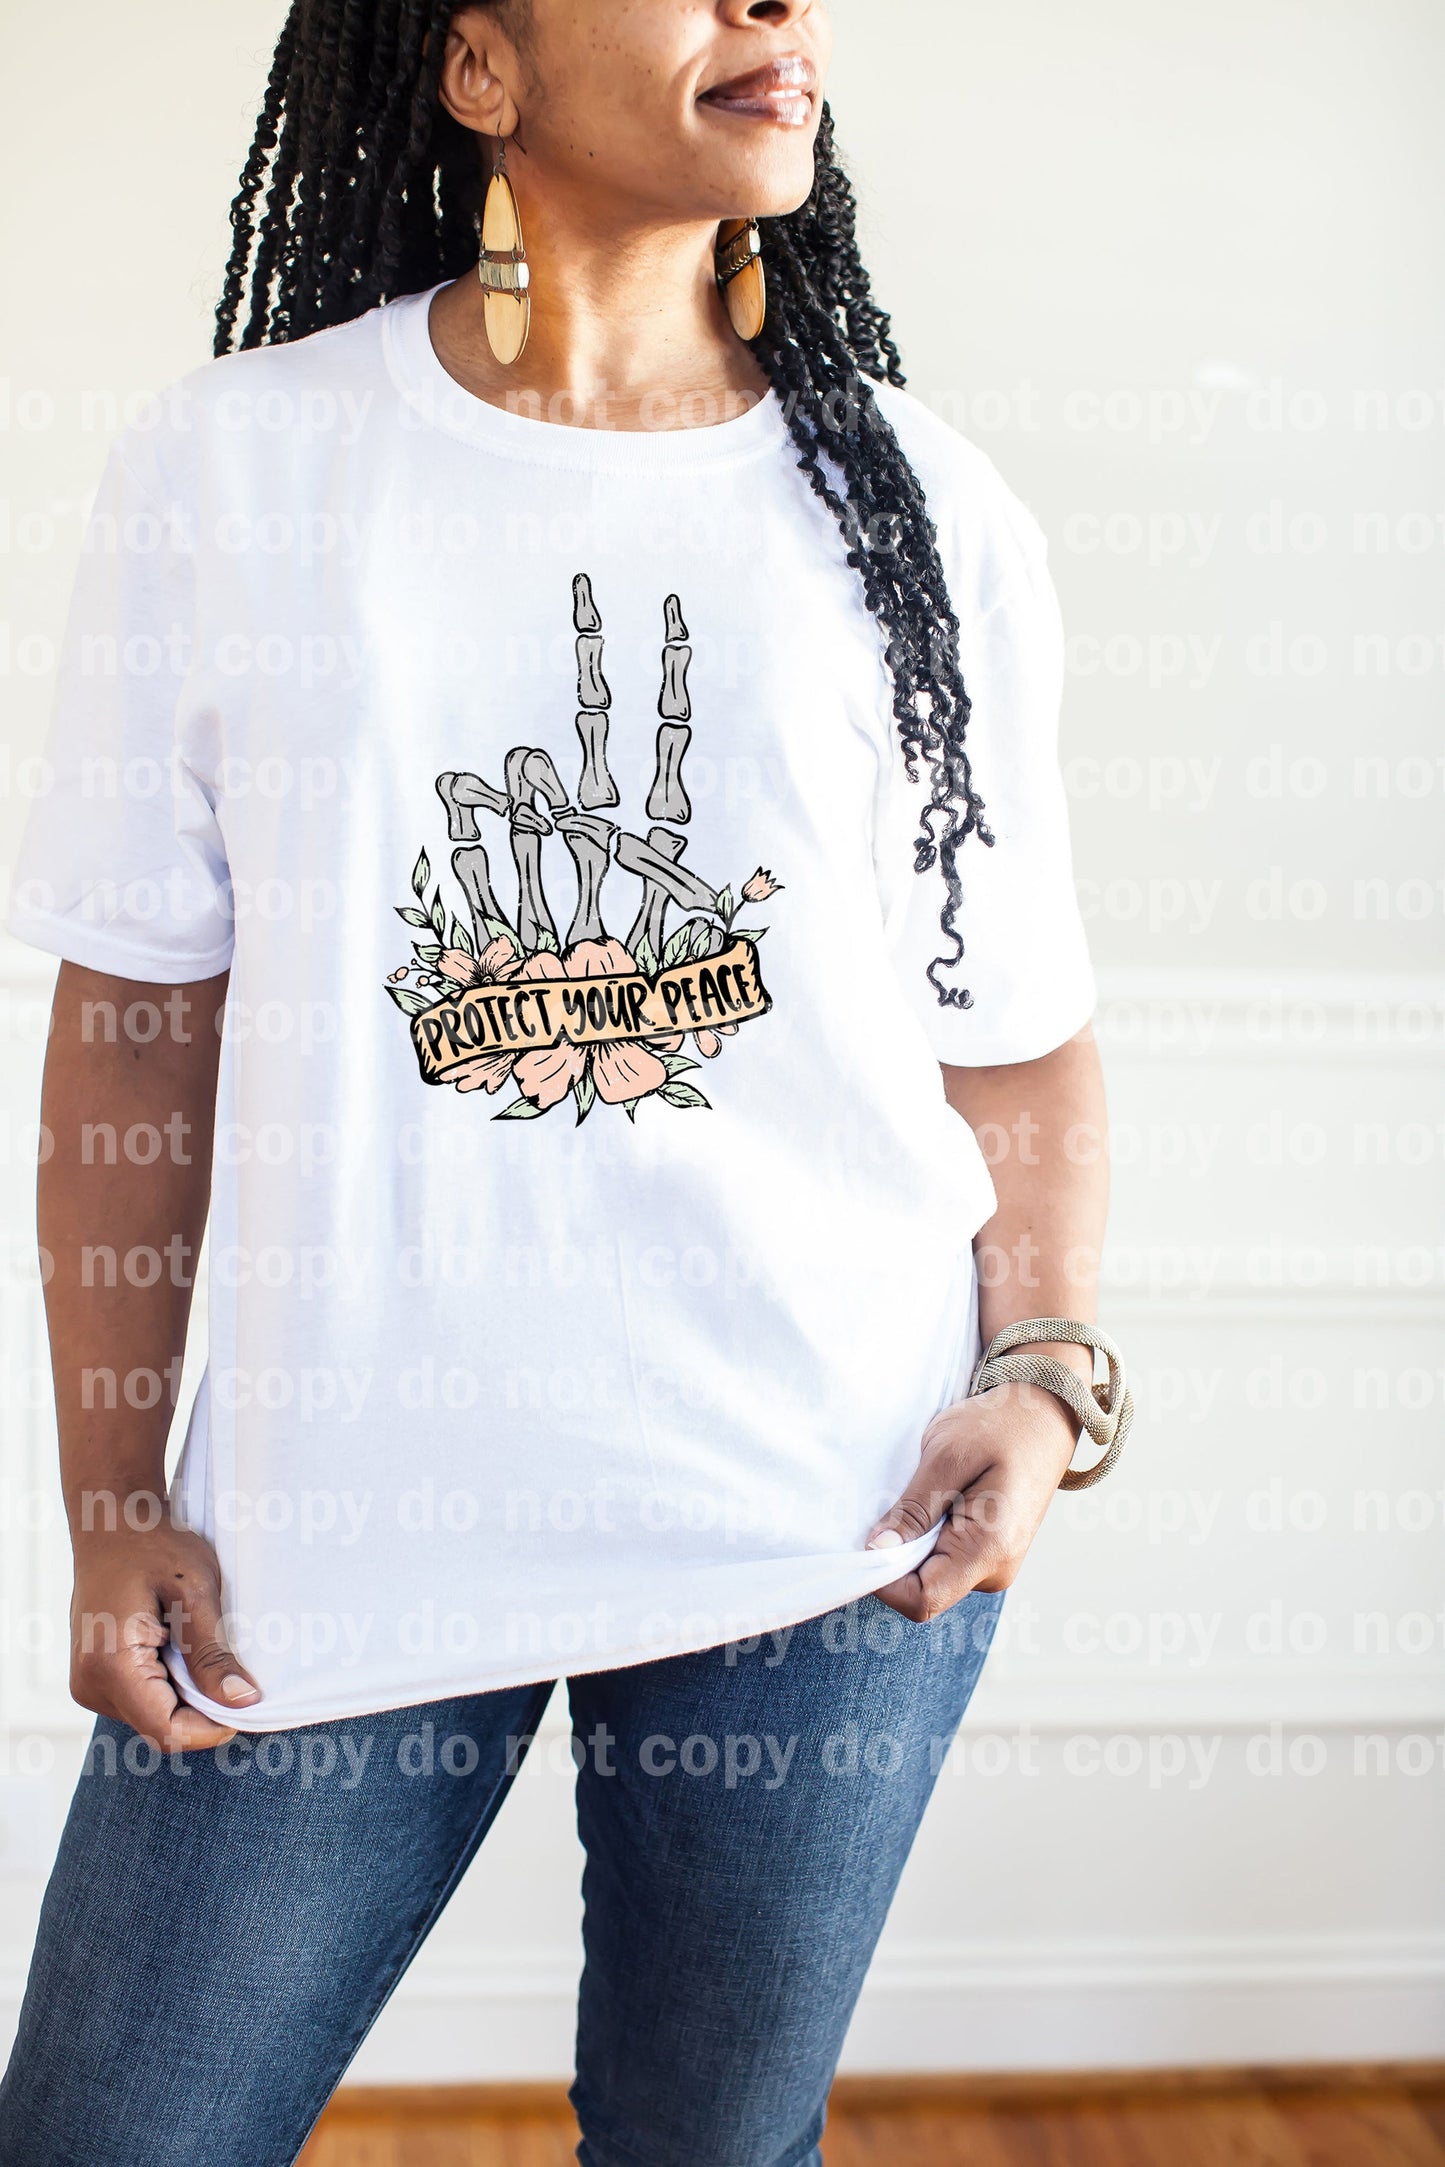 Protect Your Peace Distressed Full Color/One Color Dream Print or Sublimation Print